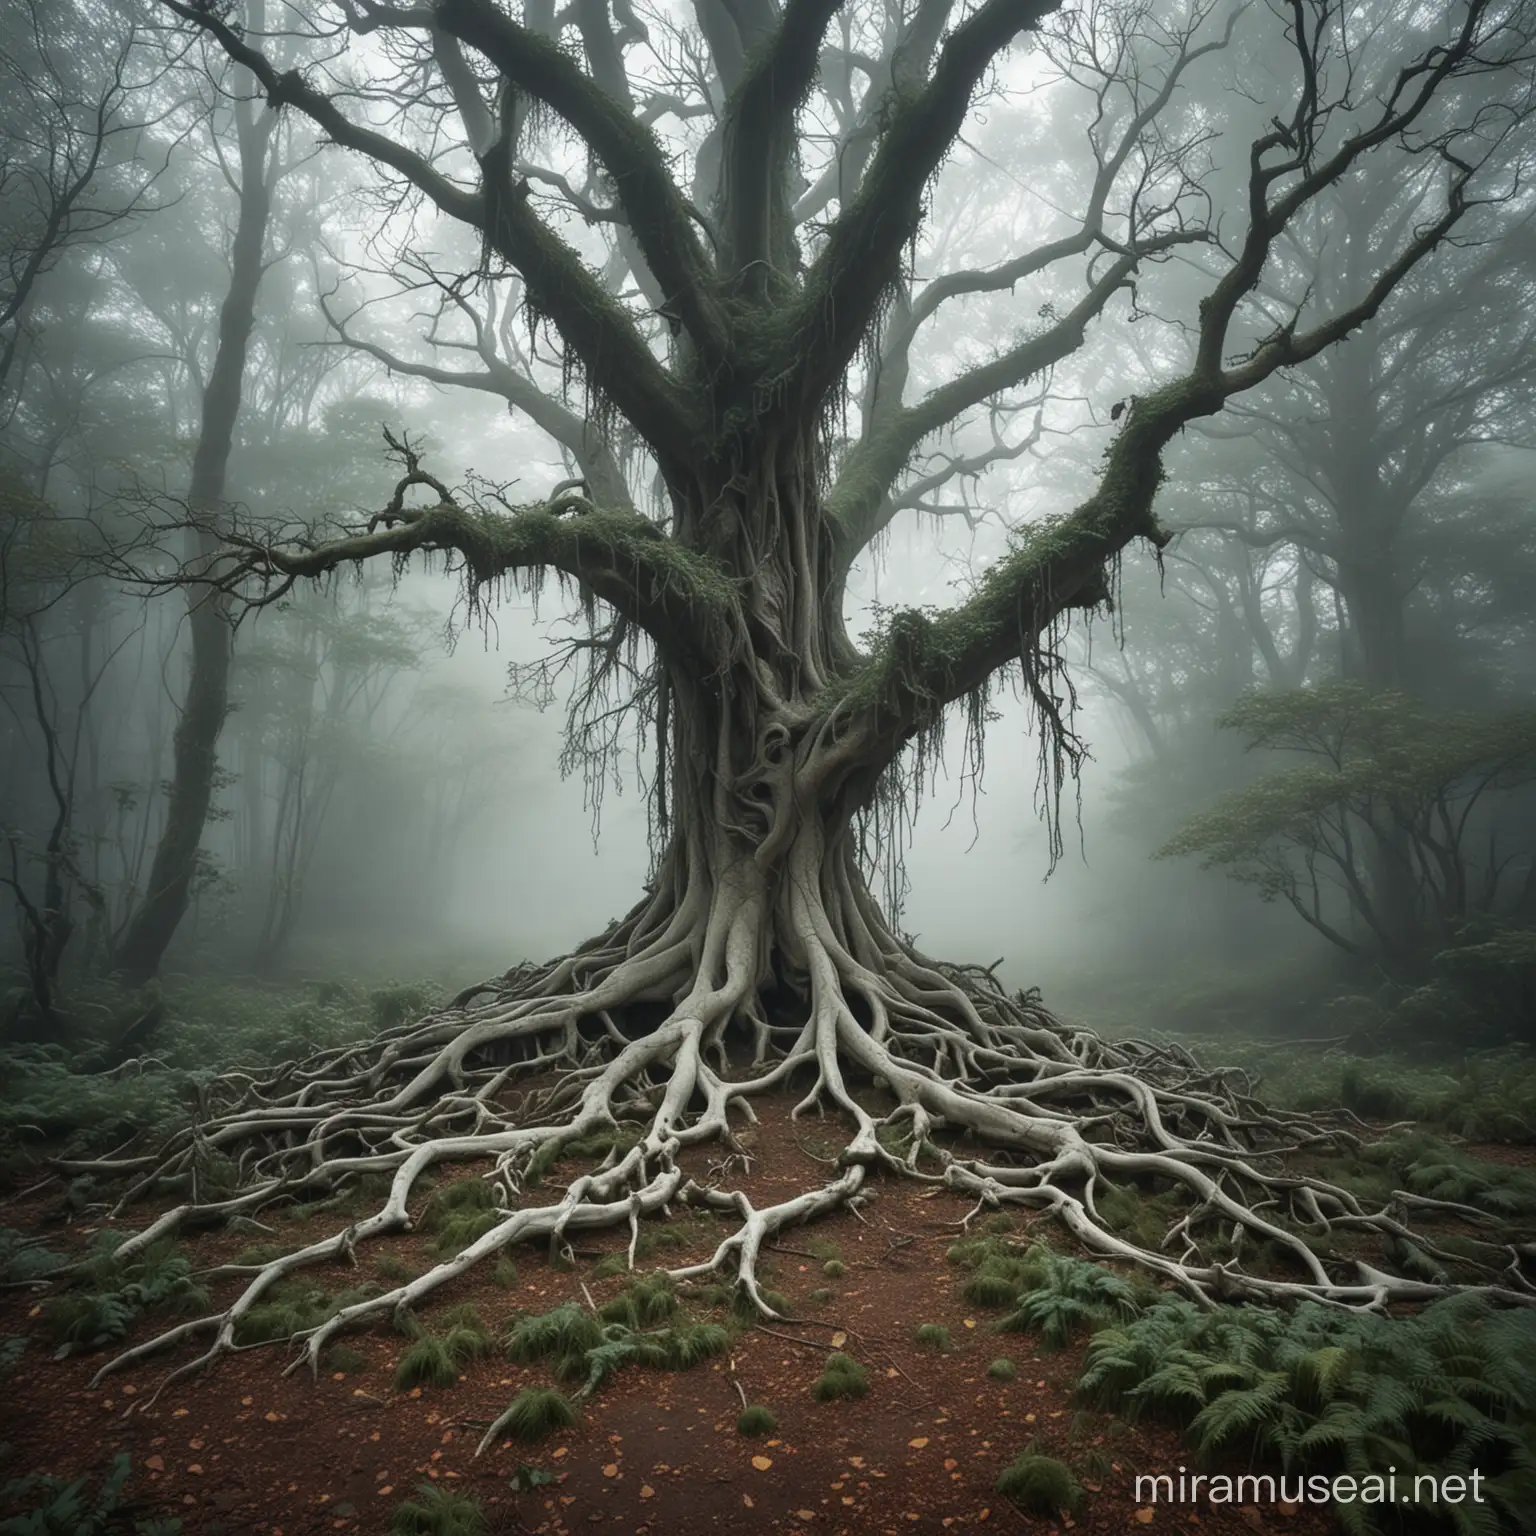 Enchanted Forest Ancient Tree with Intertwined Bones on Misty Morning